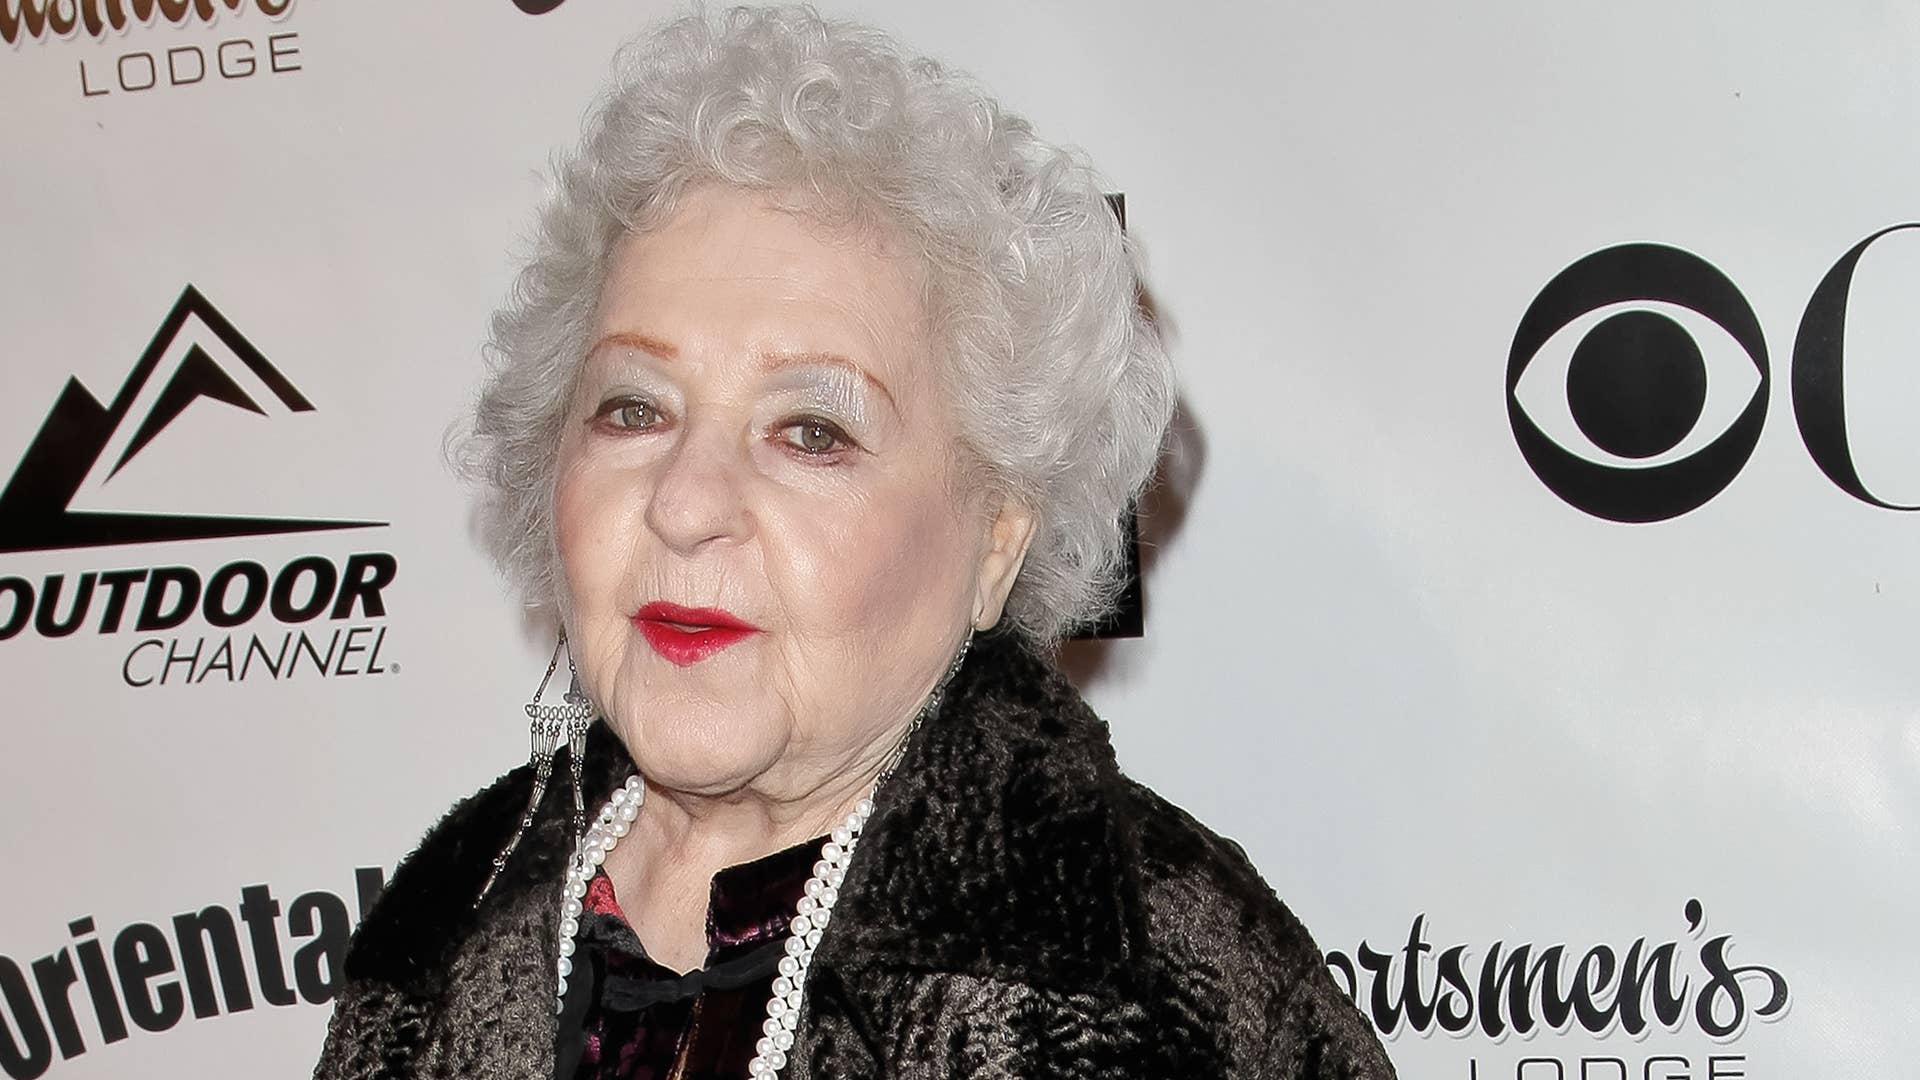 Estelle Harris attends the 2nd annual Borgnine movie star gala honoring actor Joe Mantegna